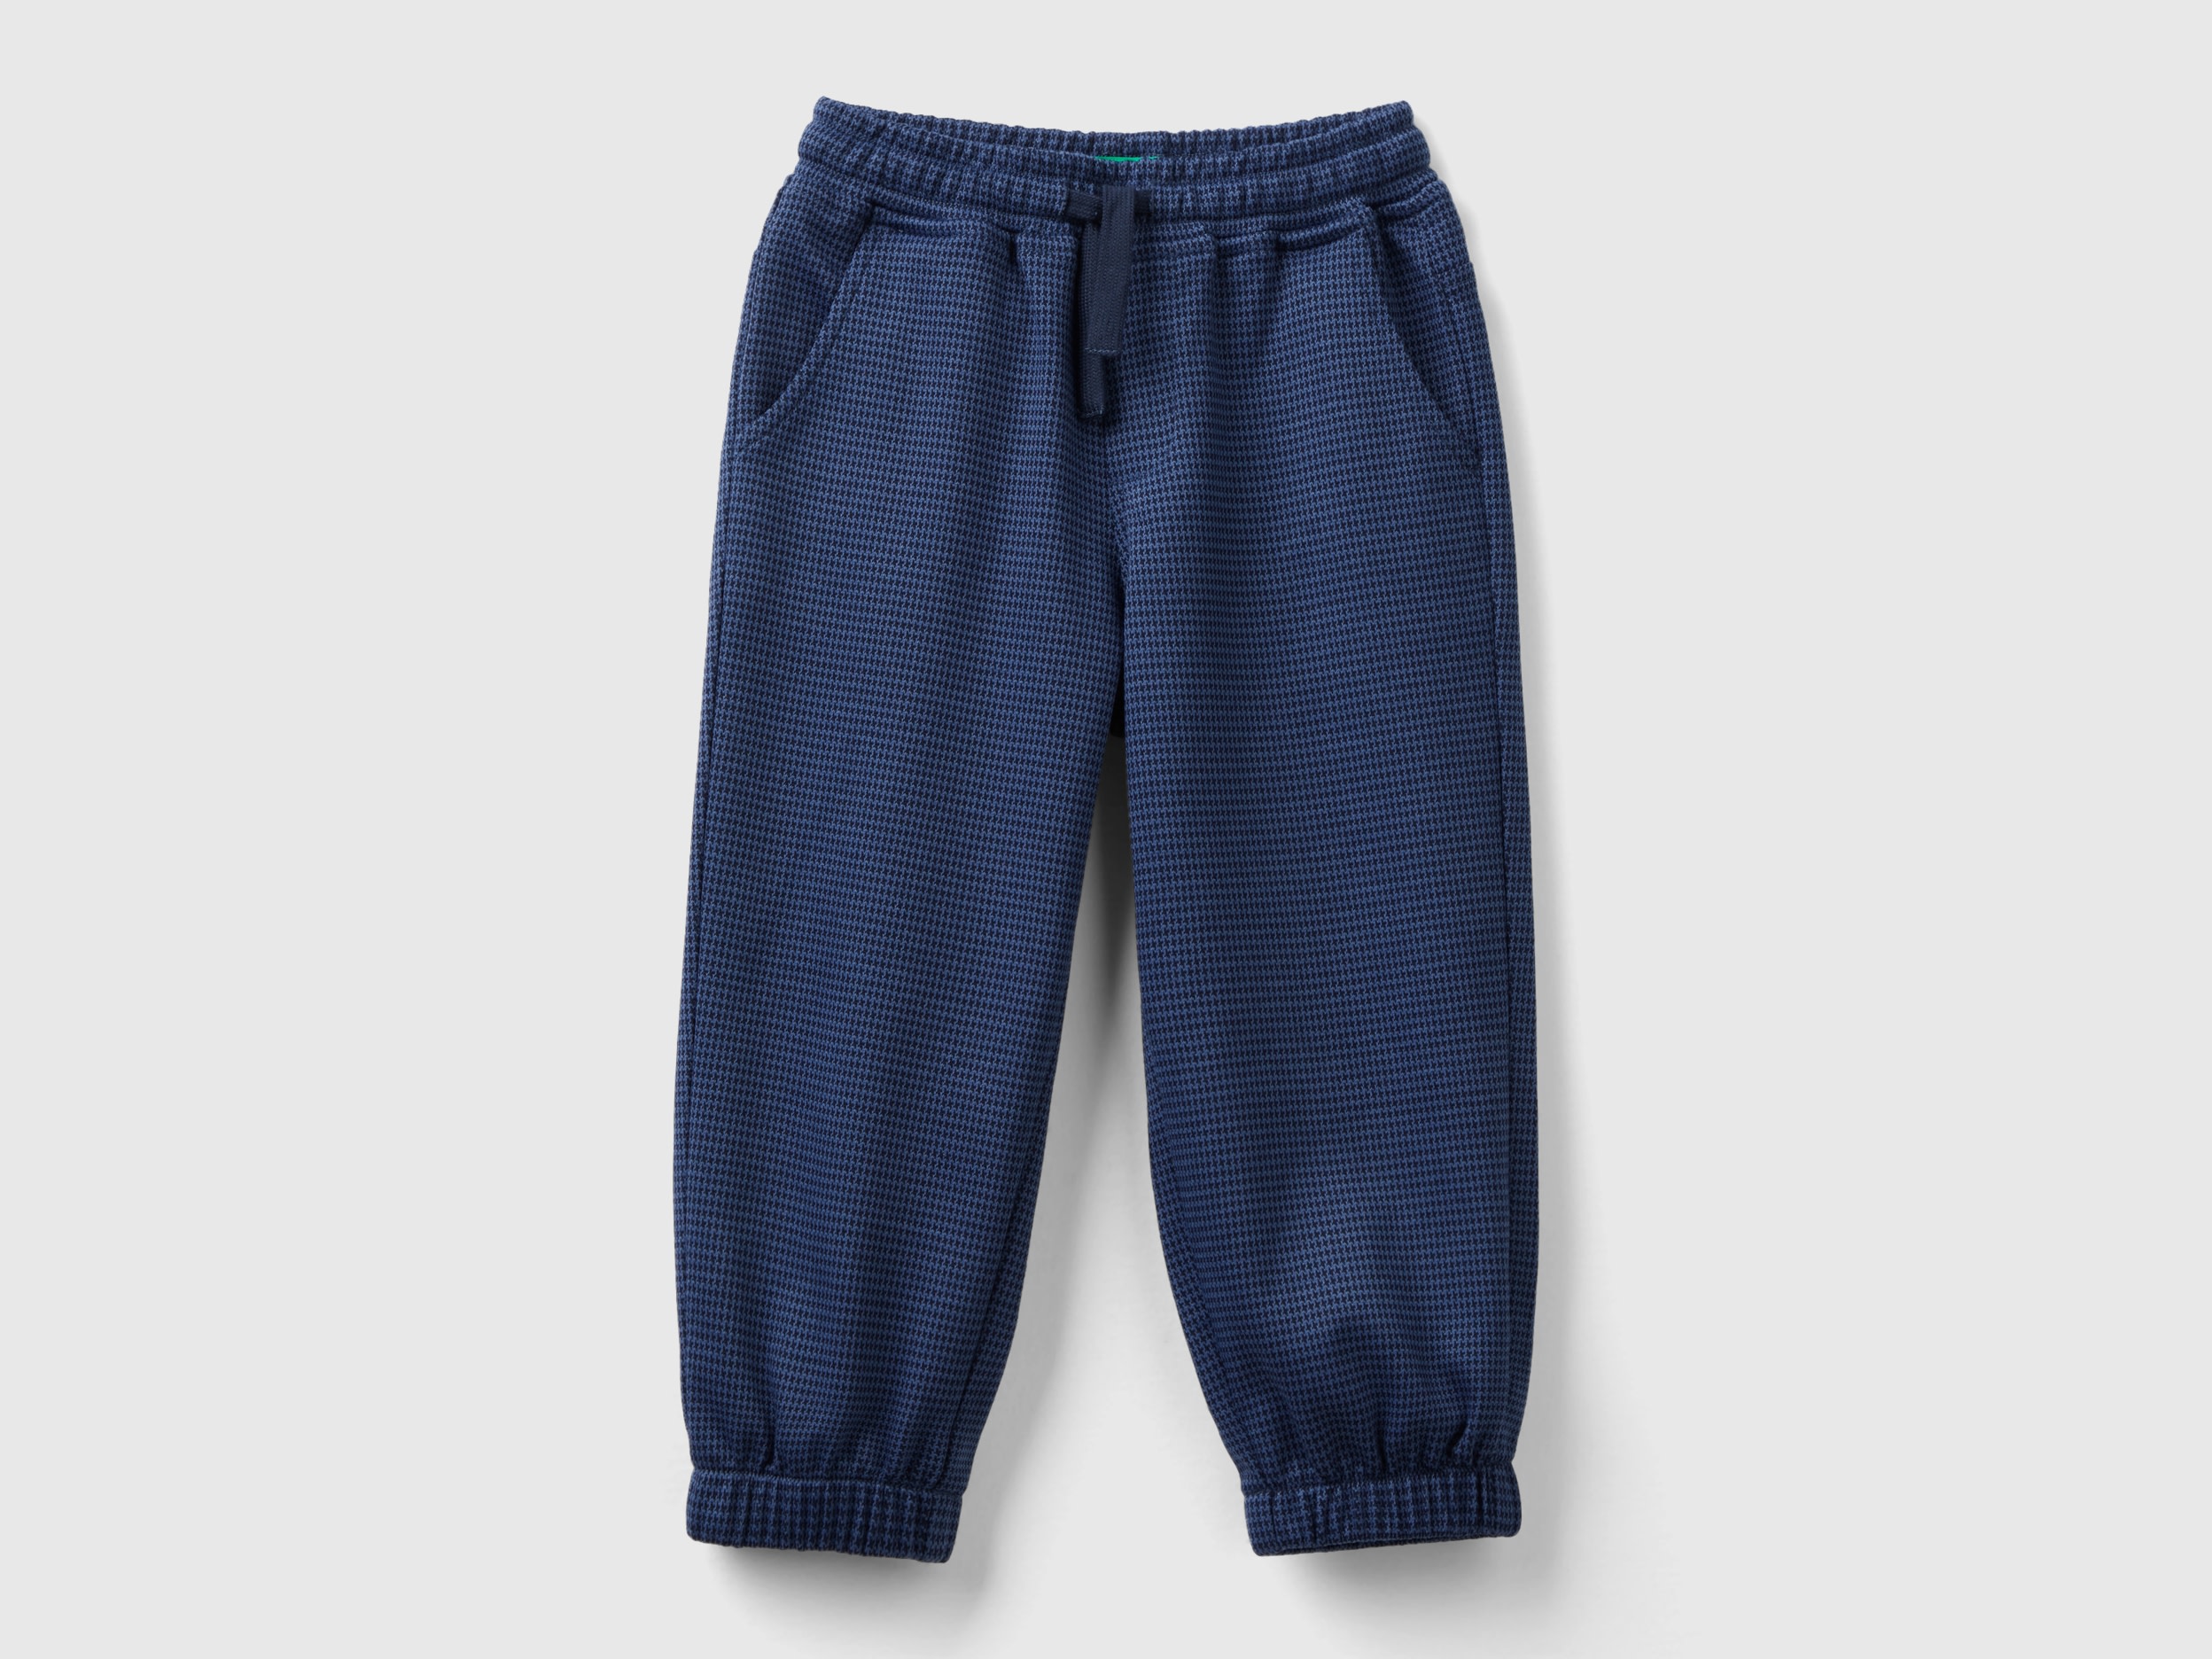 Benetton, Oversized Fit Houndstooth Trousers, size 5-6, Dark Blue, Kids